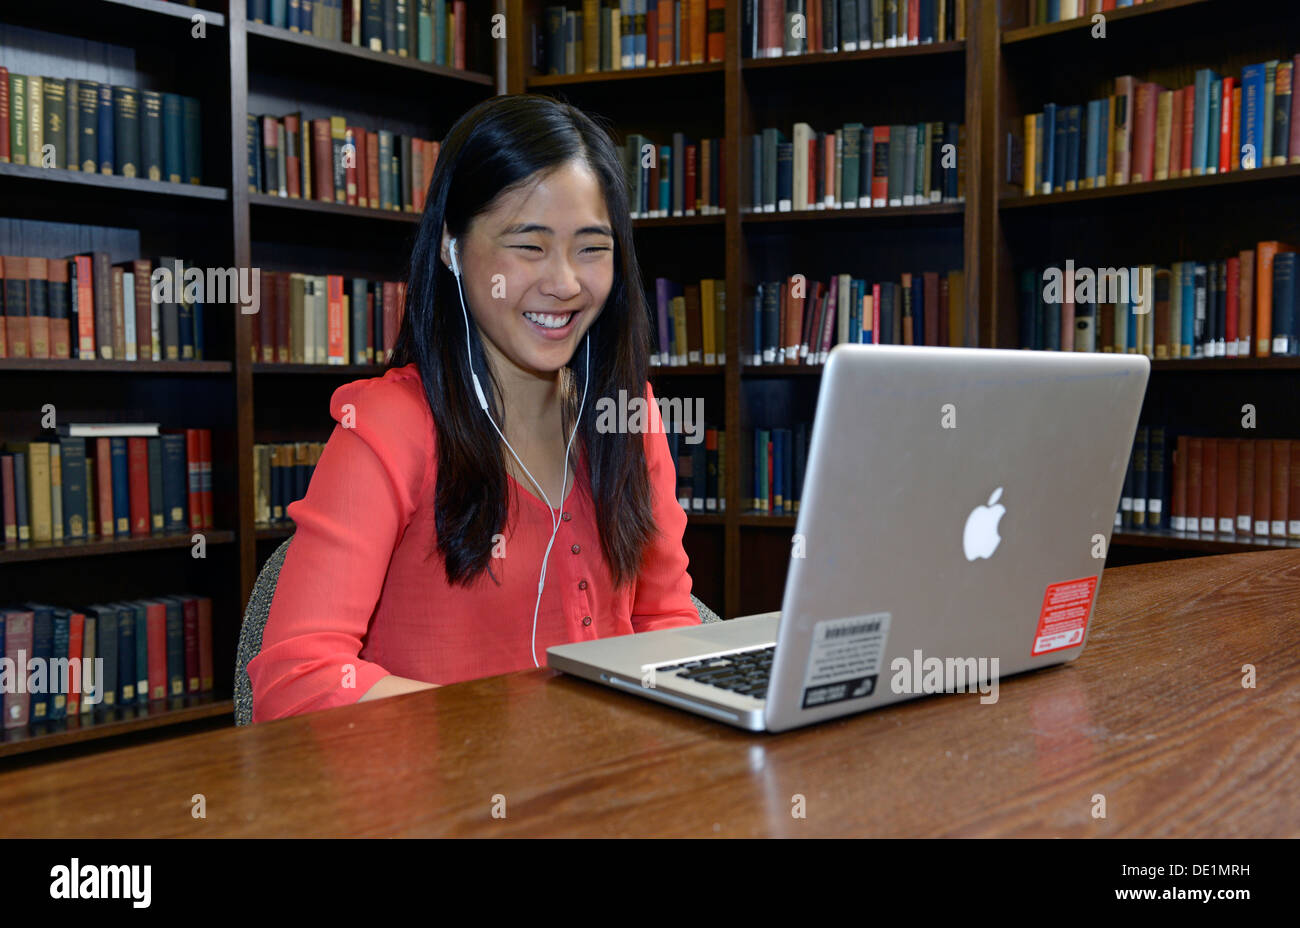 Yale student  logs into the Yale network on her computer. Stock Photo